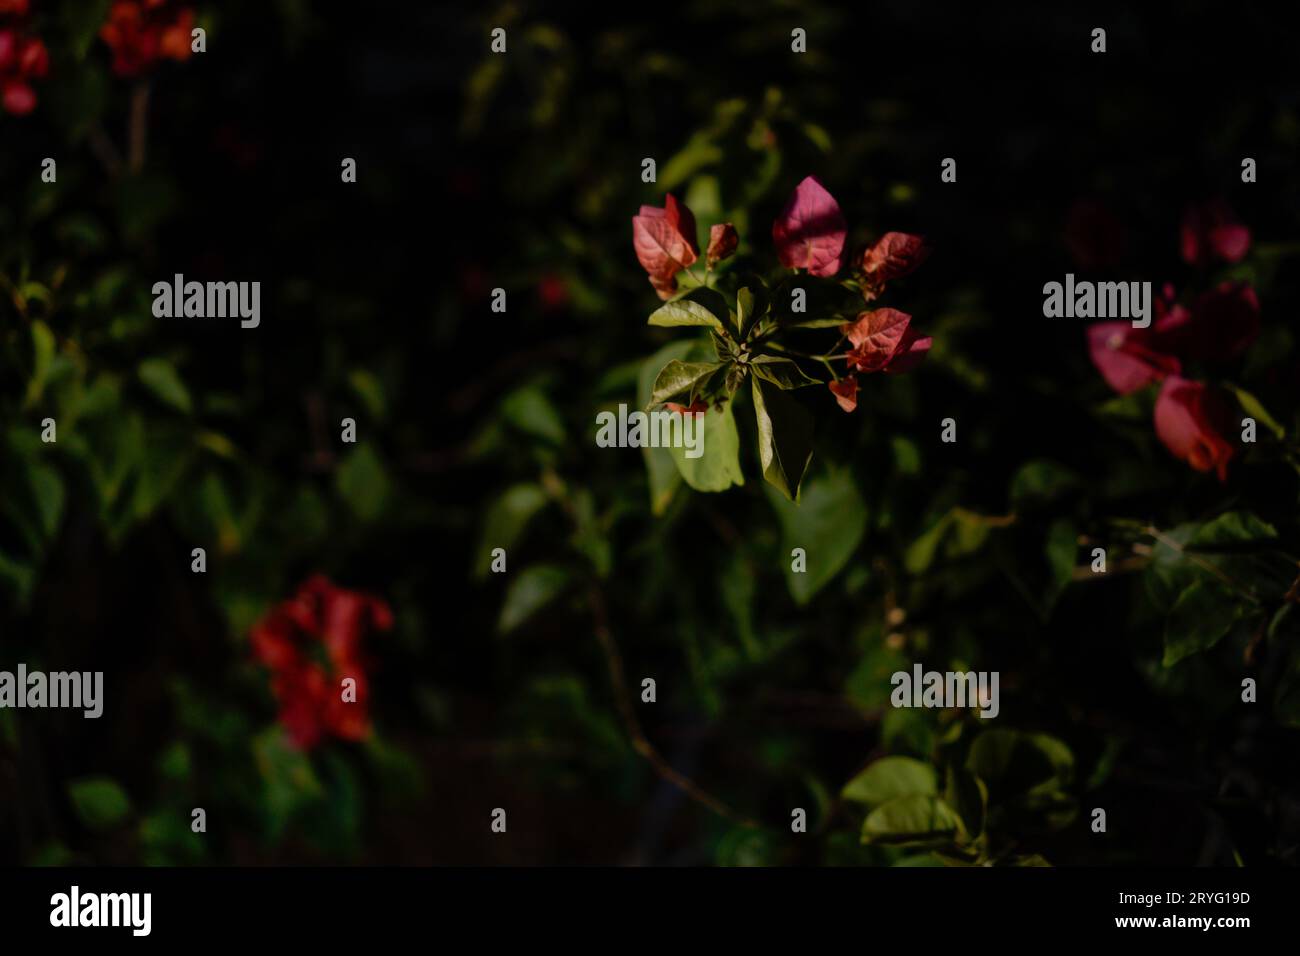 Red cotton flowers at night with lamp light, visible from the side. Close-up of red flowering plant Stock Photo